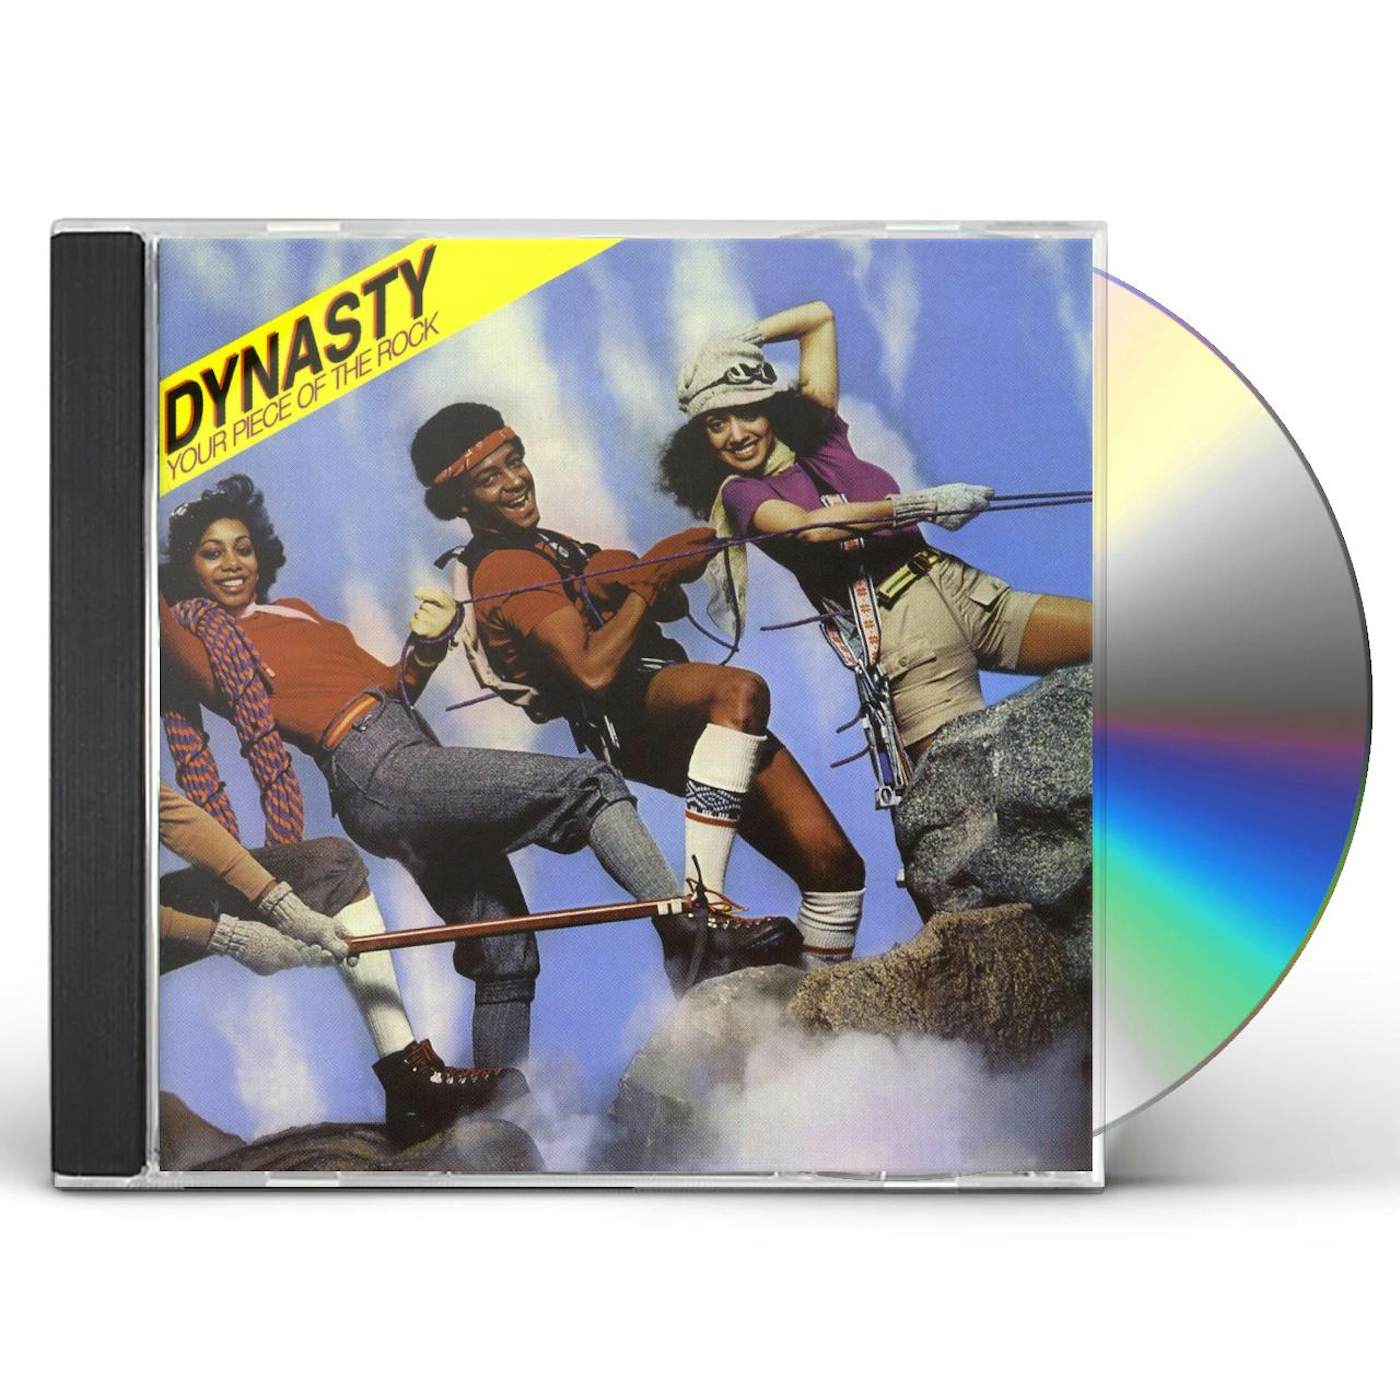 Dynasty YOUR PIECE OF THE ROCK CD